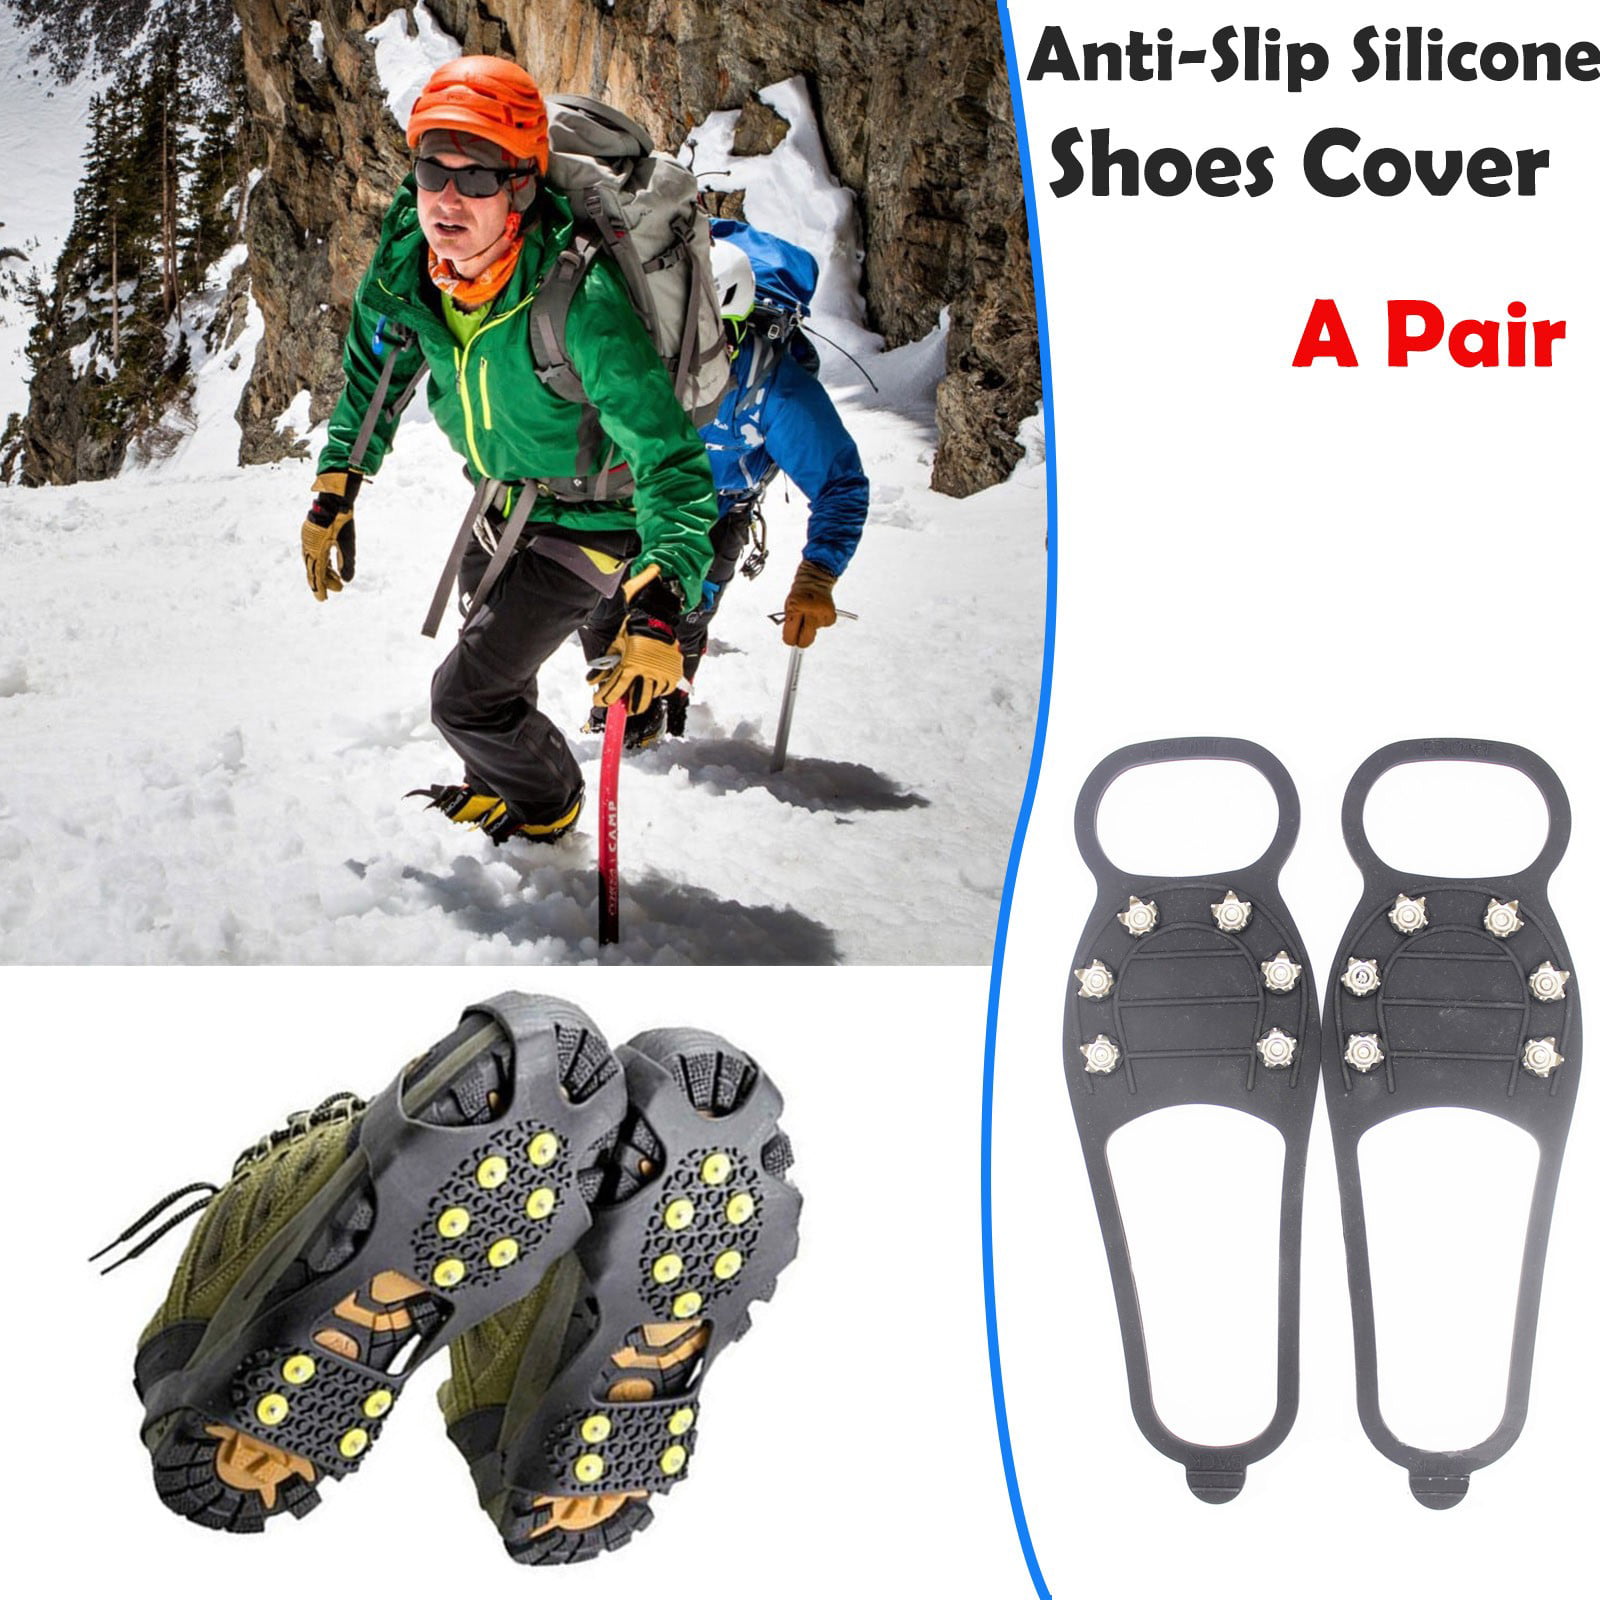 for Ice 20x Ice Climbing Crampons Safety Anti Slip Shoes Spikes Grips Cleats 